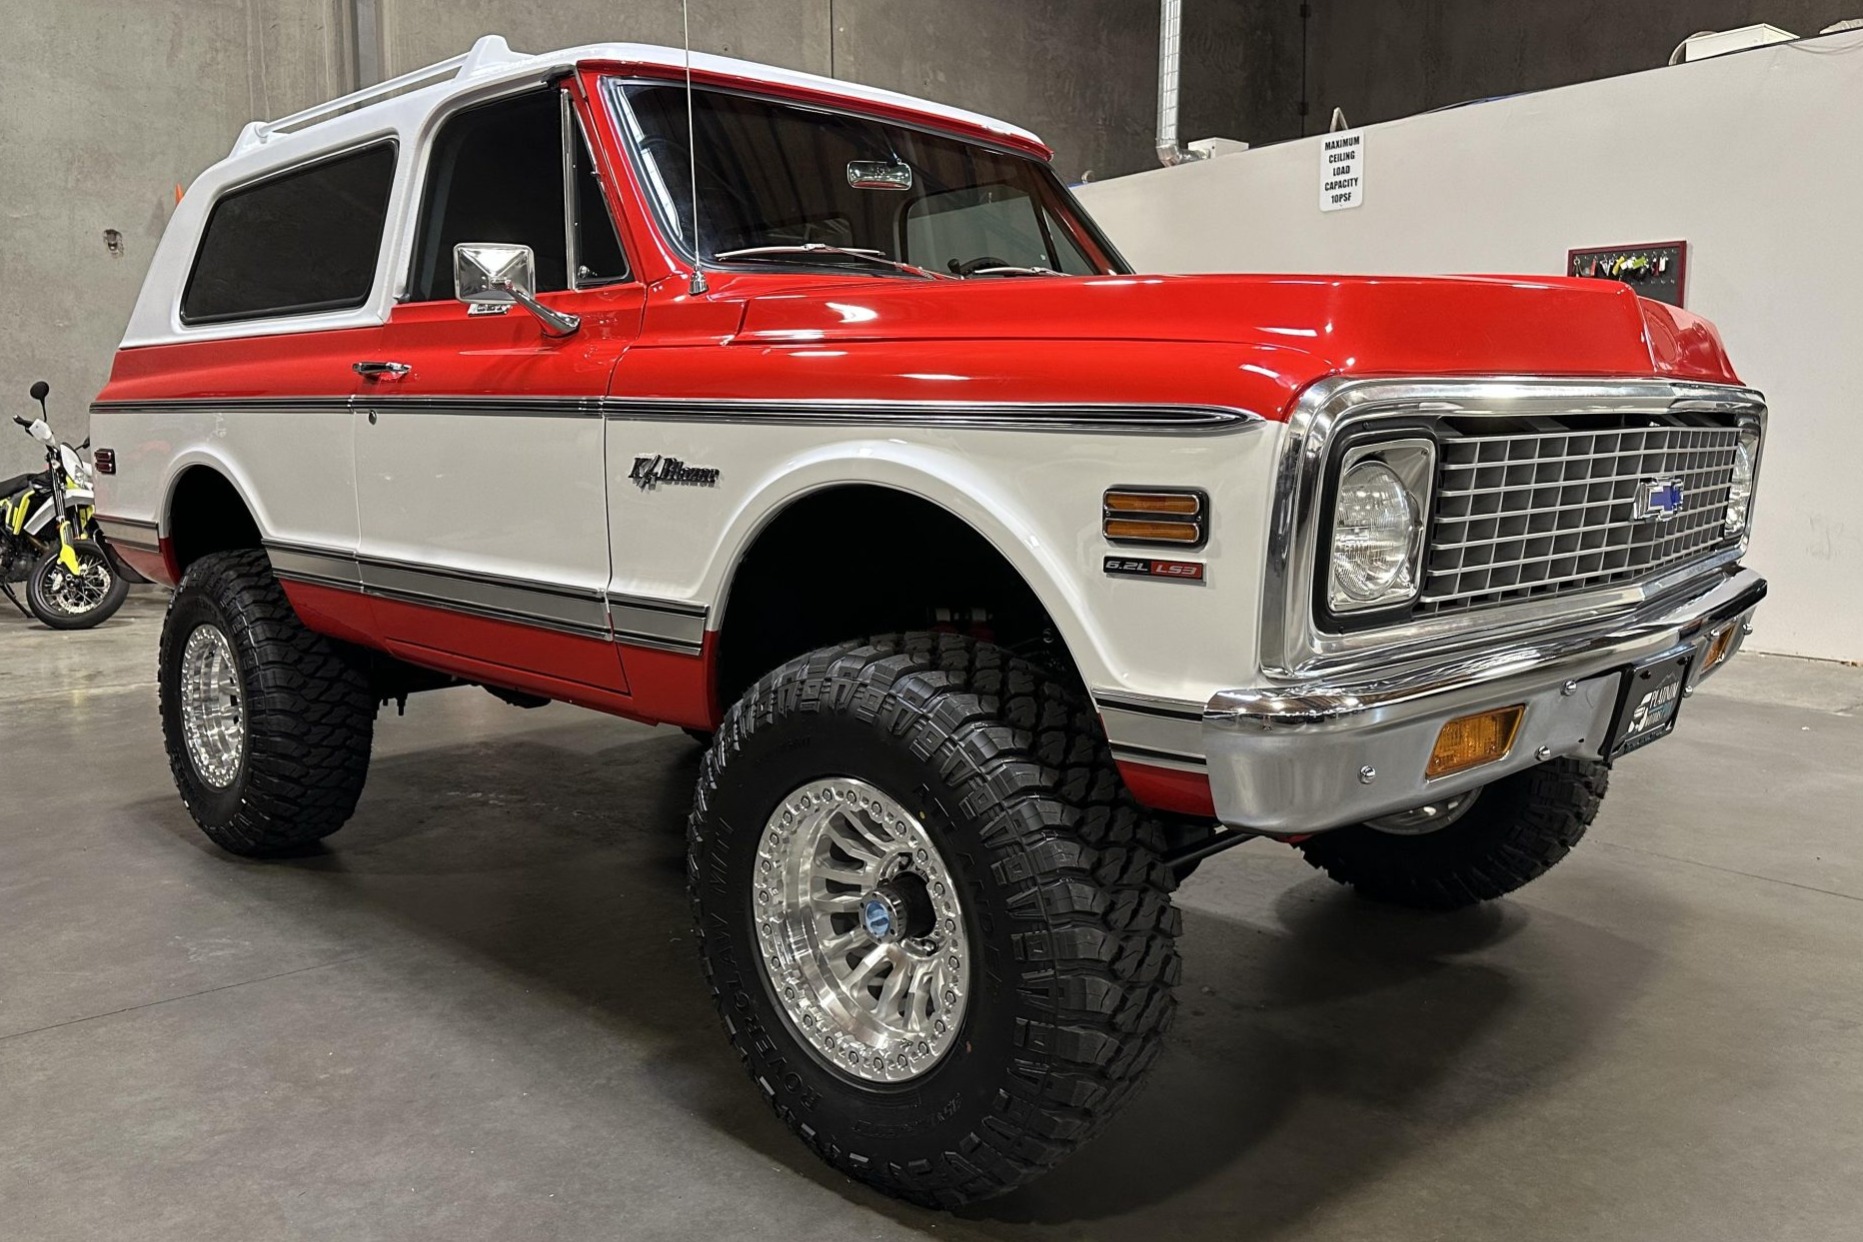 Used LS3-Powered 1972 Chevrolet K5 Blazer CST 4×4 Review